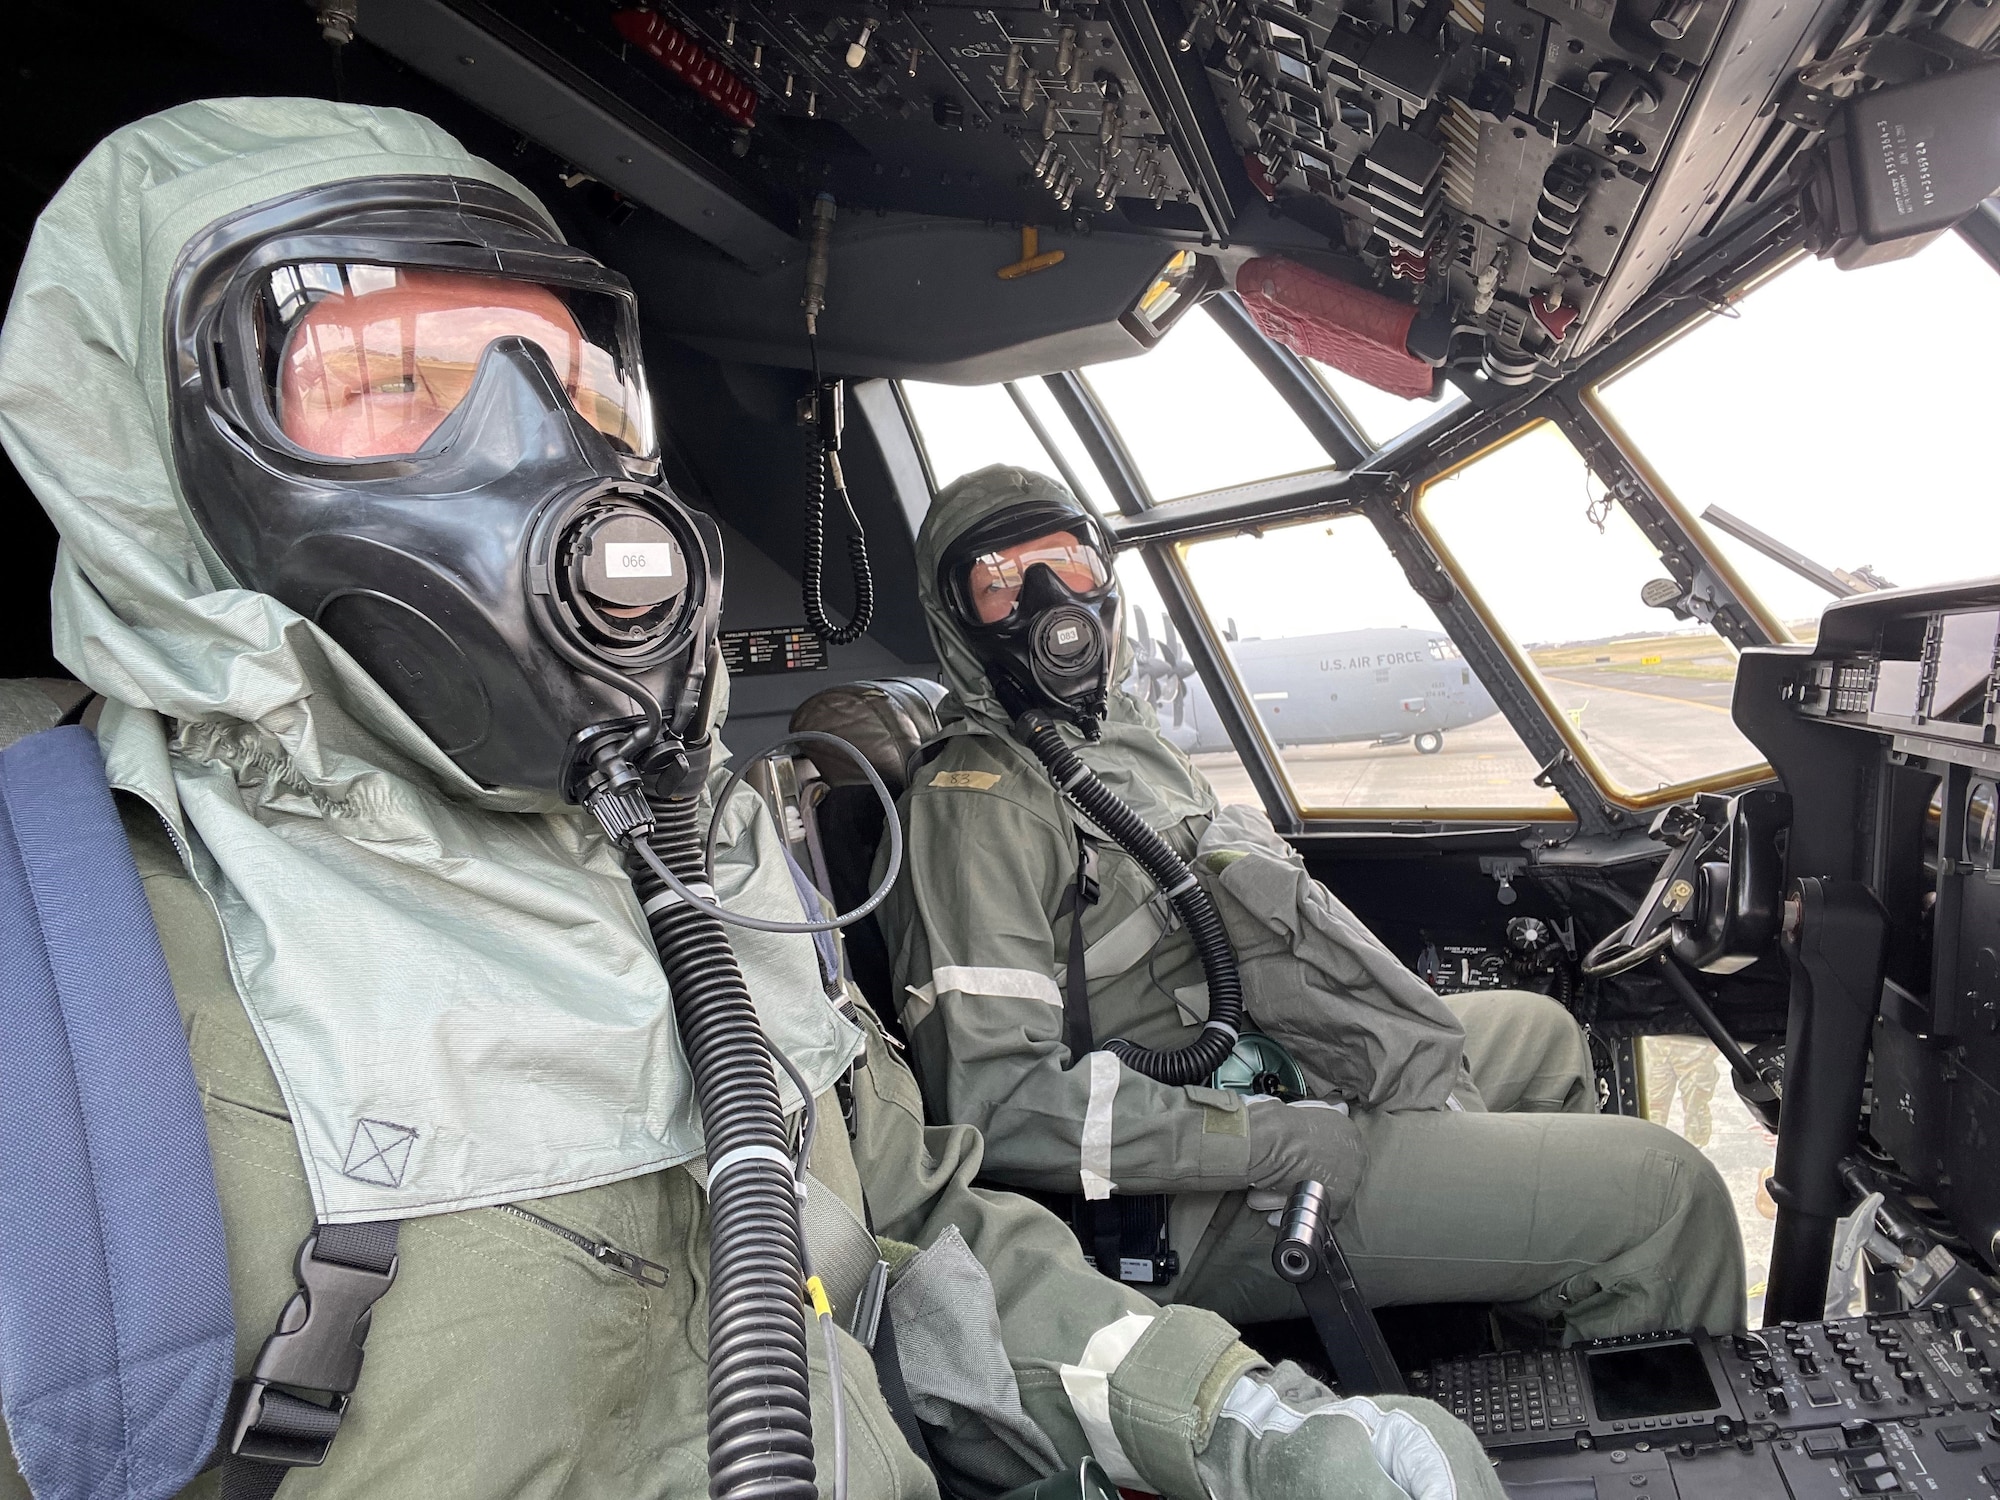 Two pilots in HAZMAT suits sit in the pilot seats of  a cargo aircraft